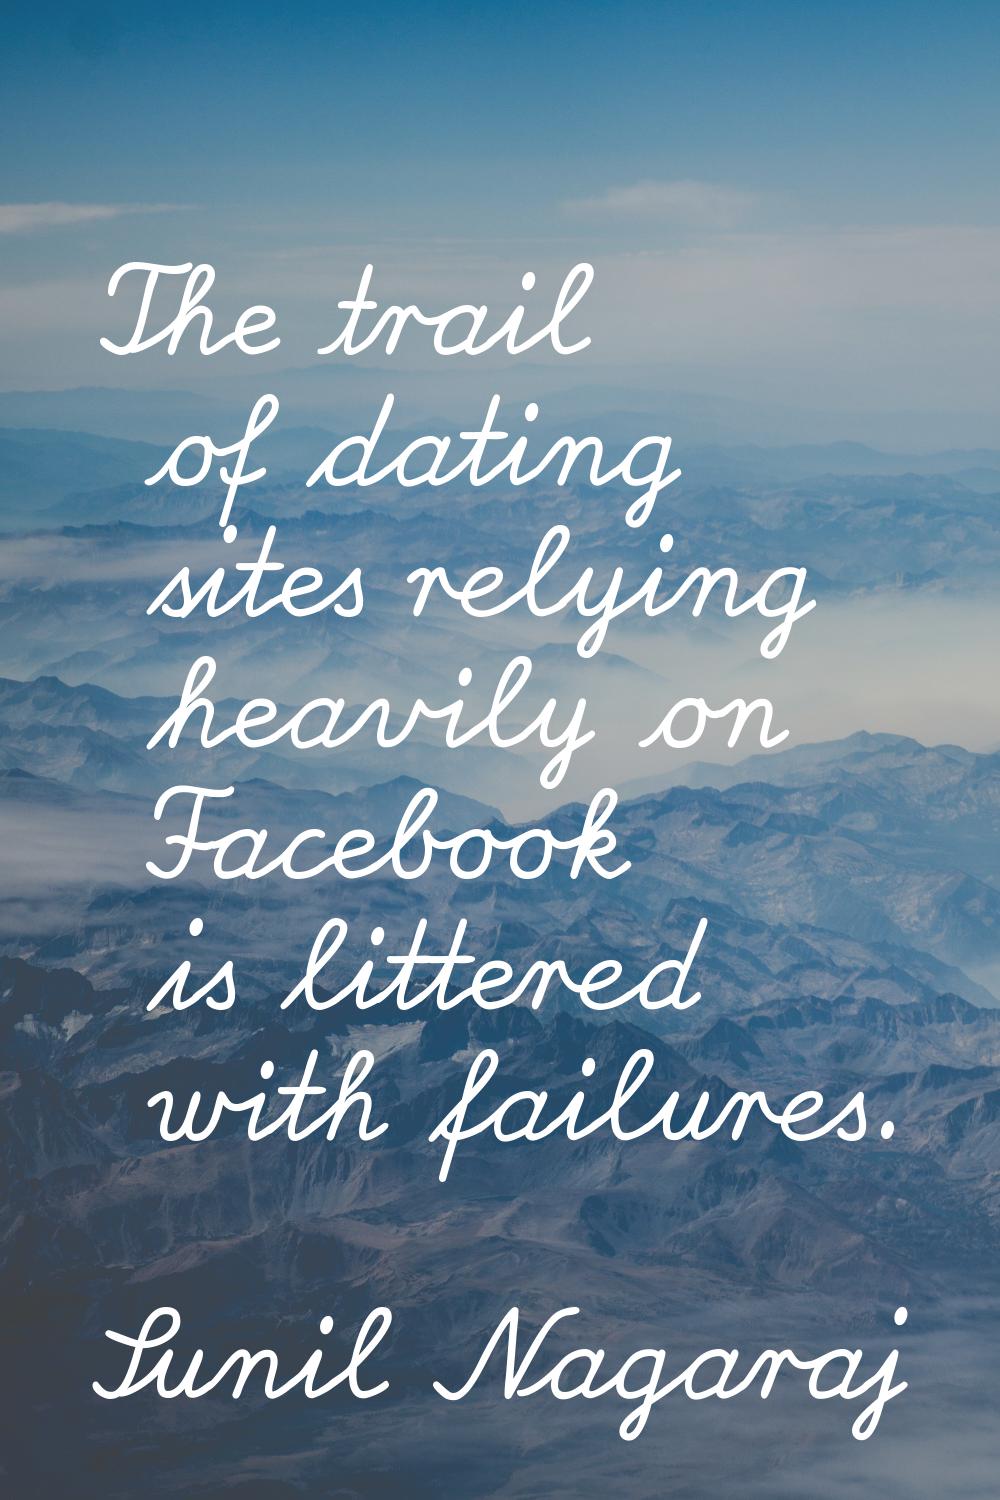 The trail of dating sites relying heavily on Facebook is littered with failures.